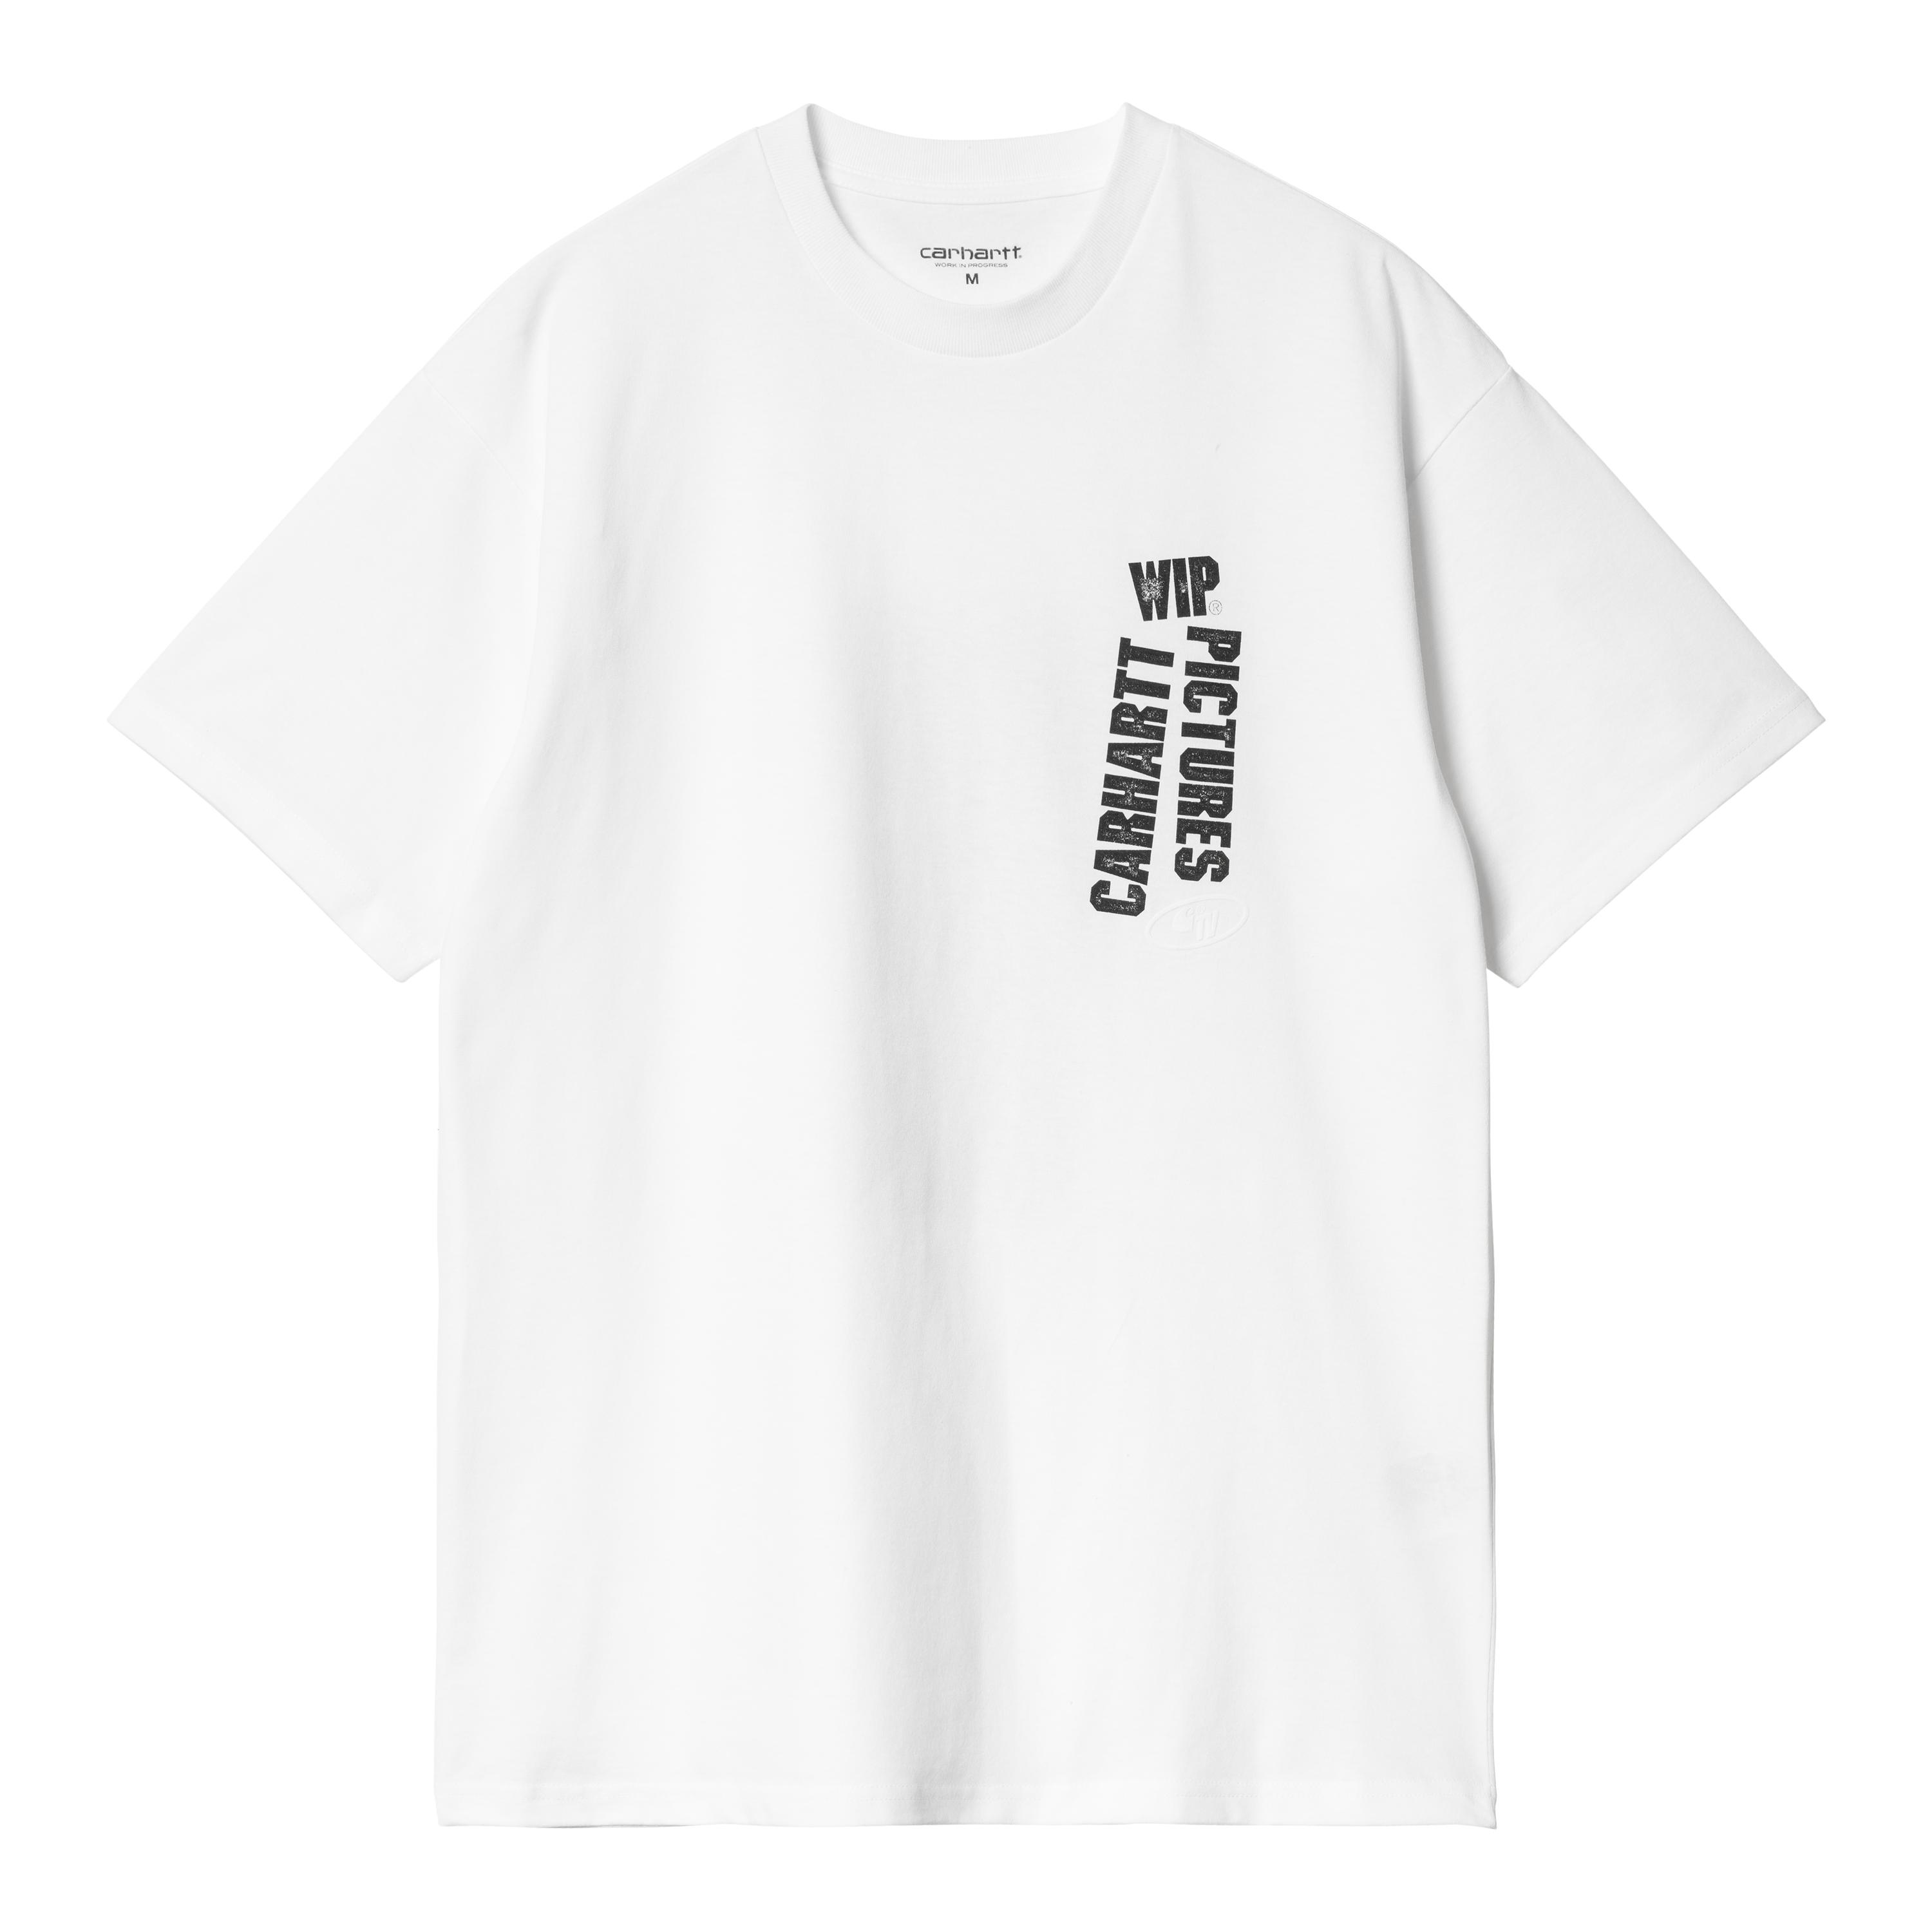 Carhartt WIP Short Sleeve Wip Pictures T-Shirt in Bianco